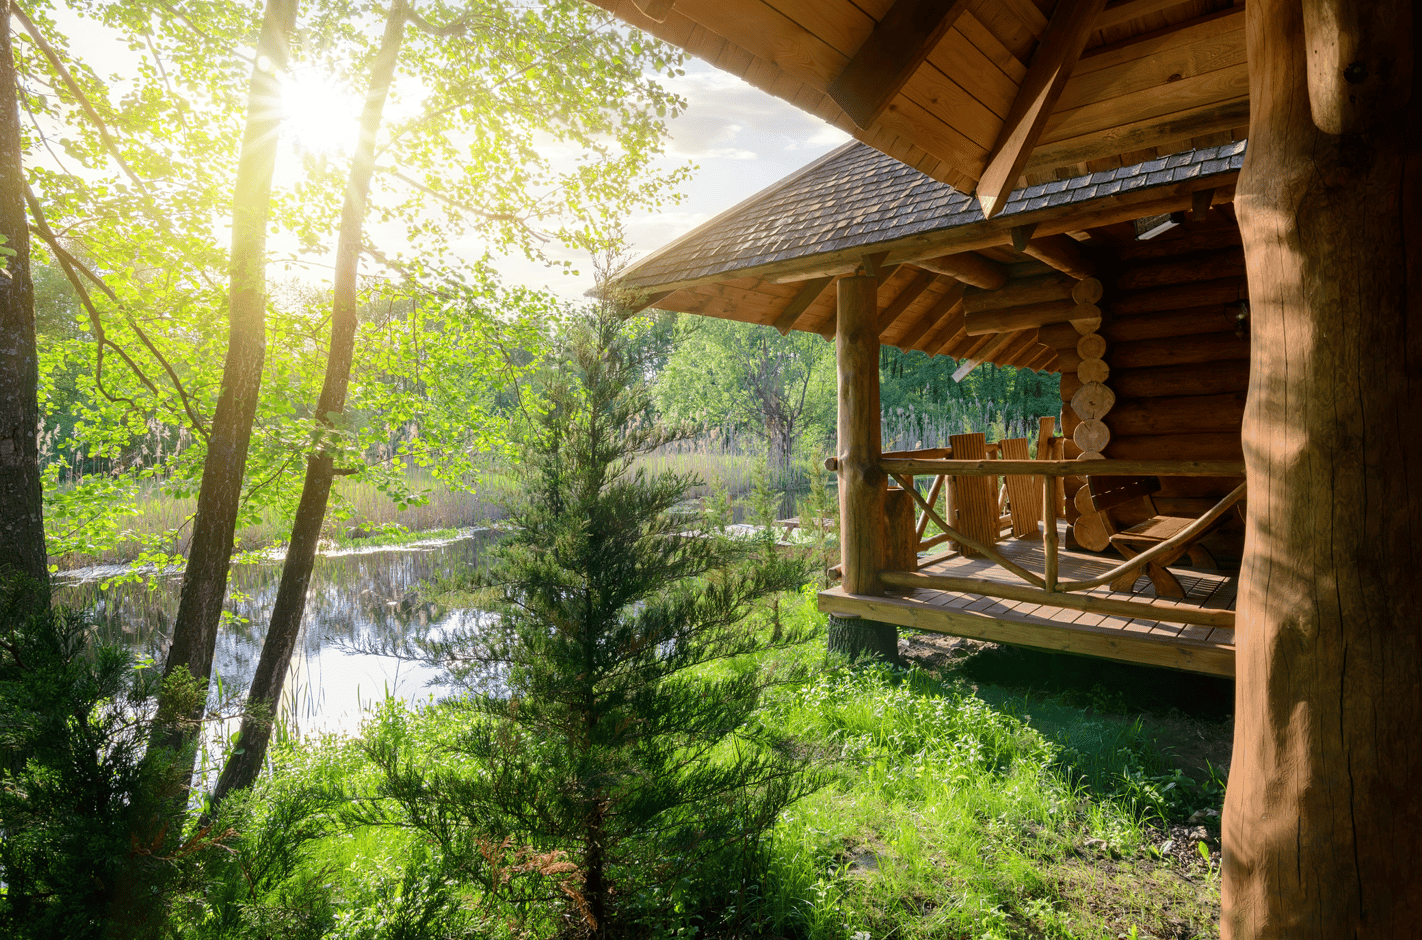 There are many ways a log home or cabin stands out as energy efficient